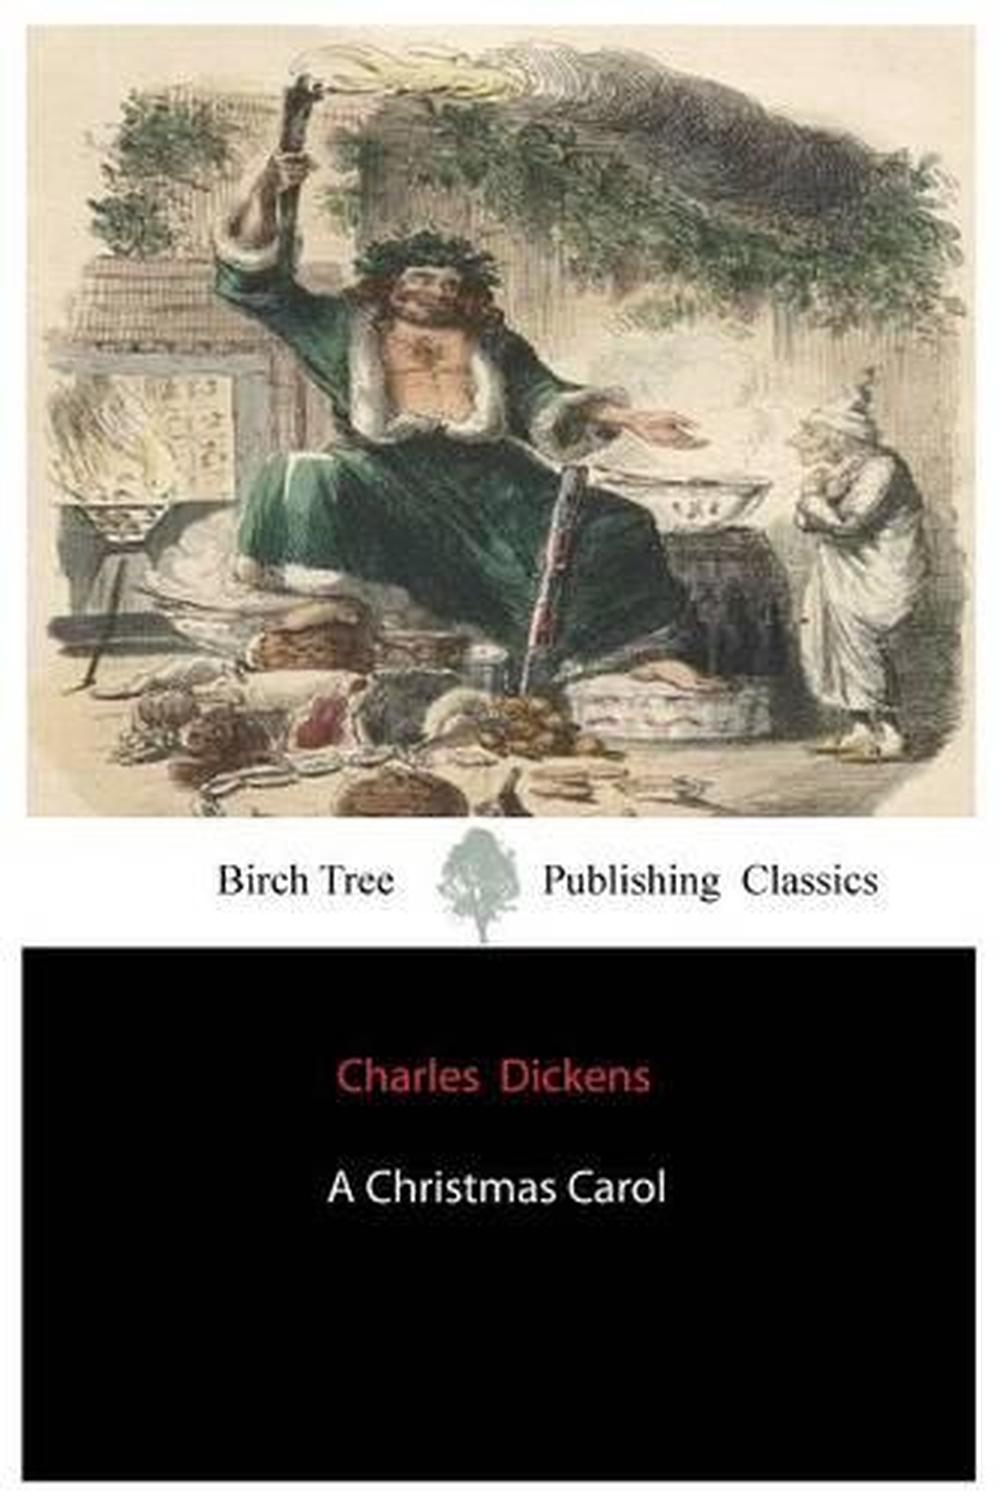 A Christmas Carol by Charles Dickens (English) Paperback Book Free Shipping! 9781927558362 | eBay